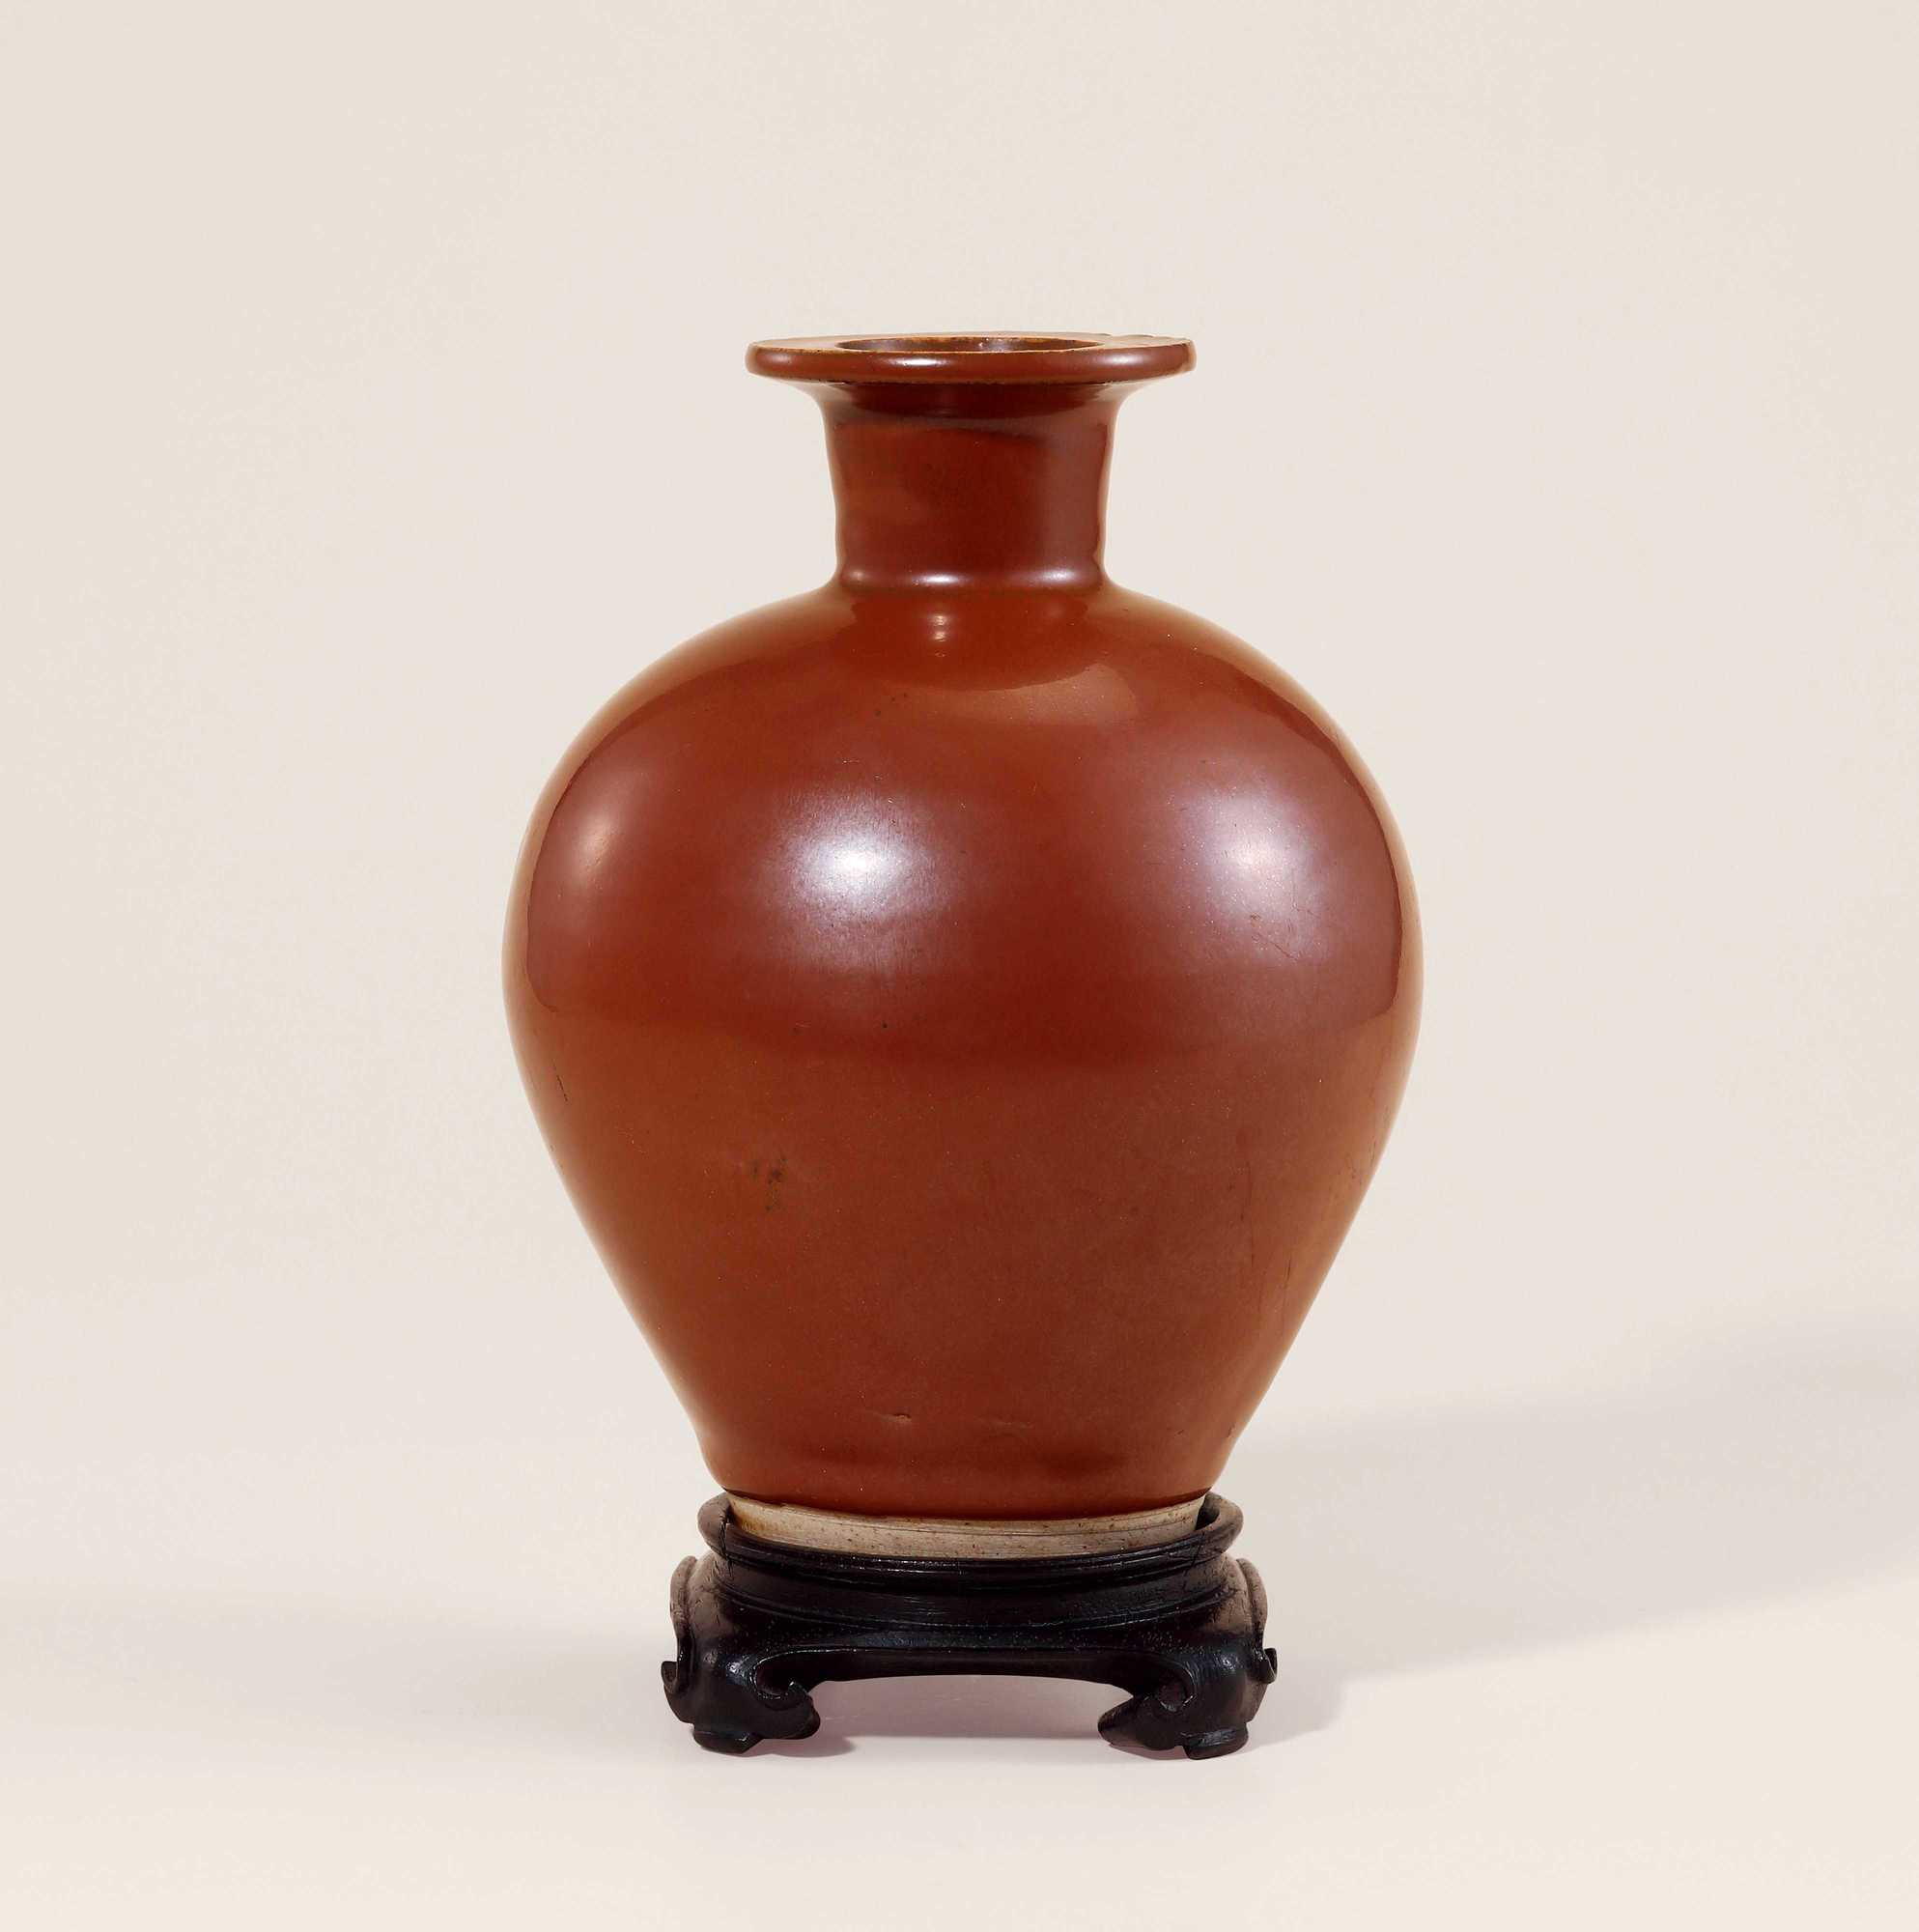 A DANGYANGYU WARE PERSIMMON-GLAZED VASE, MEIPING